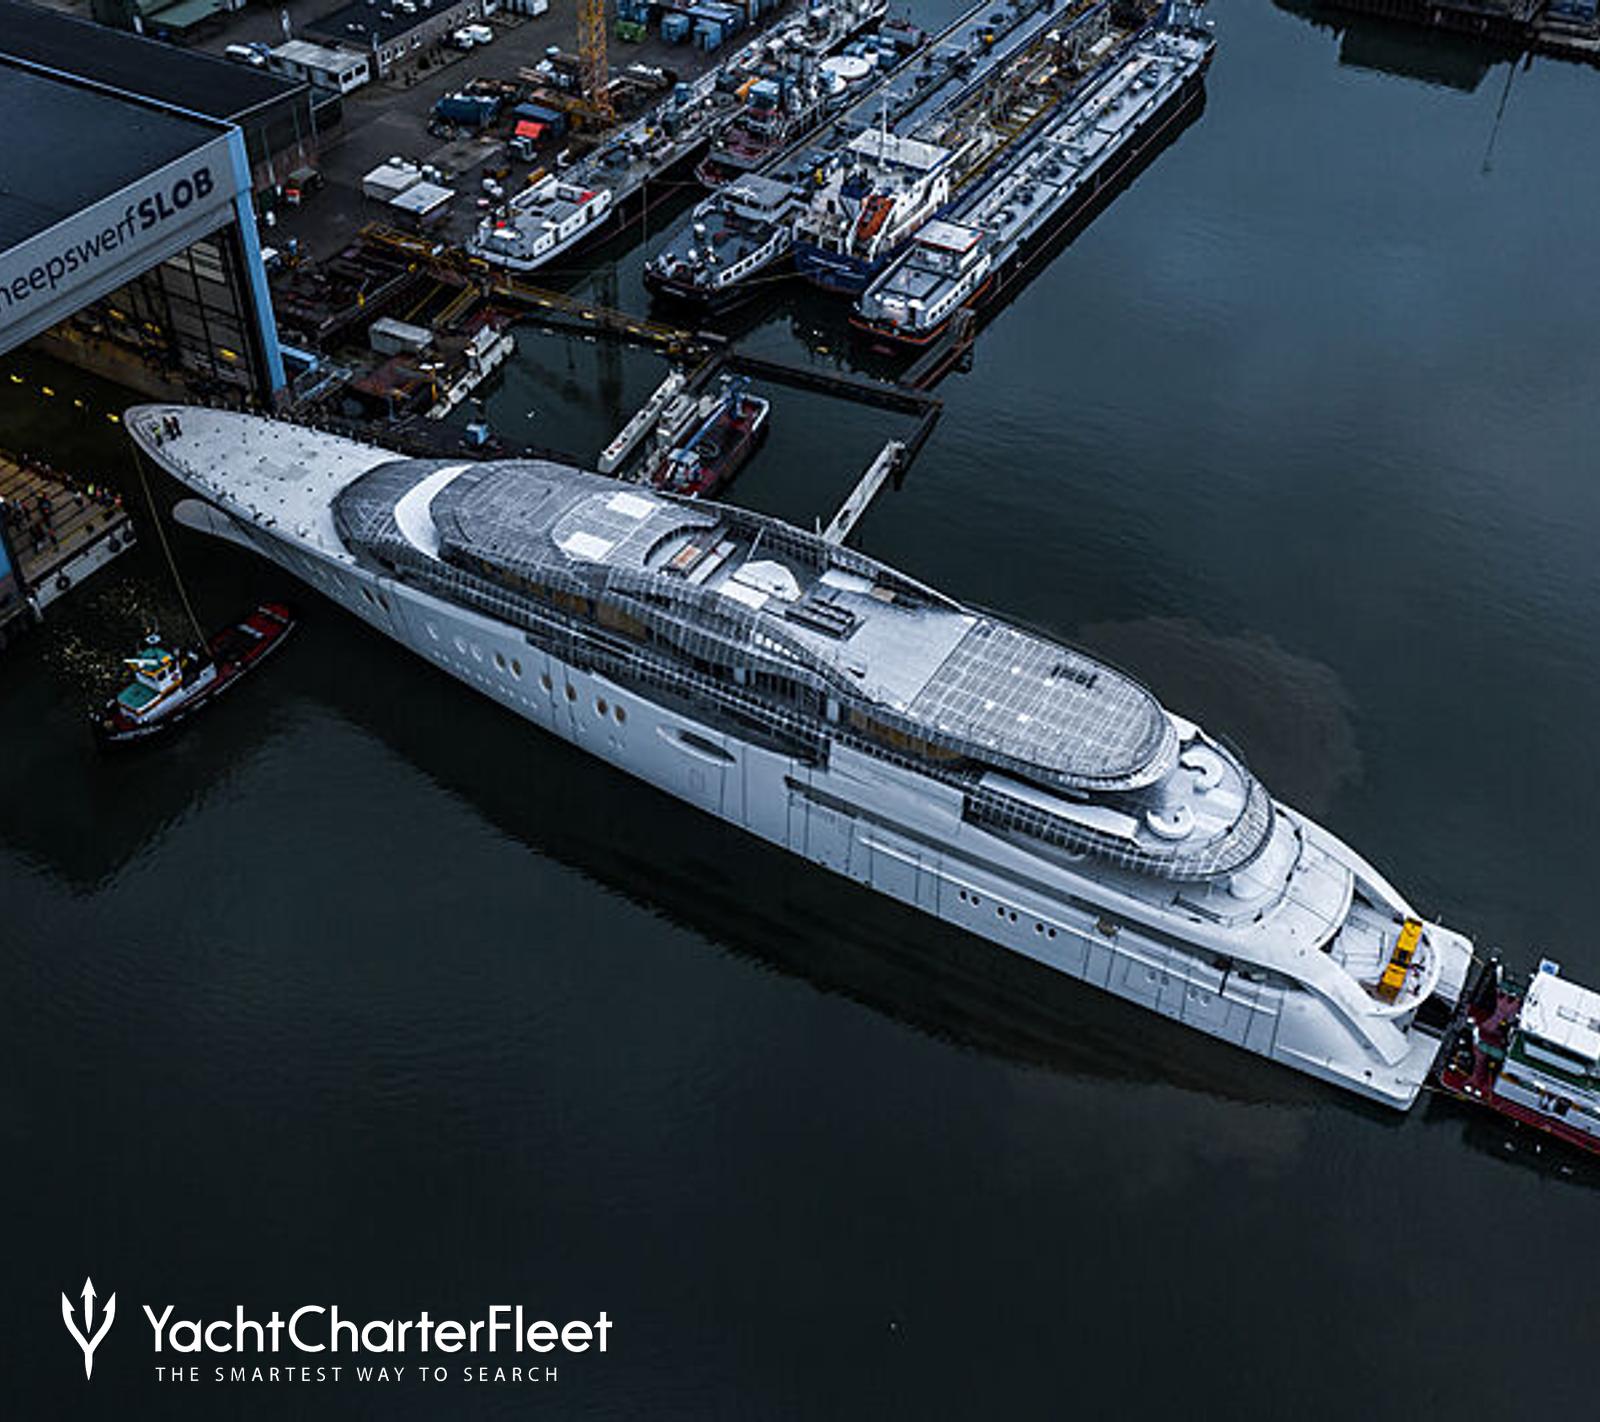 where are feadship yachts built